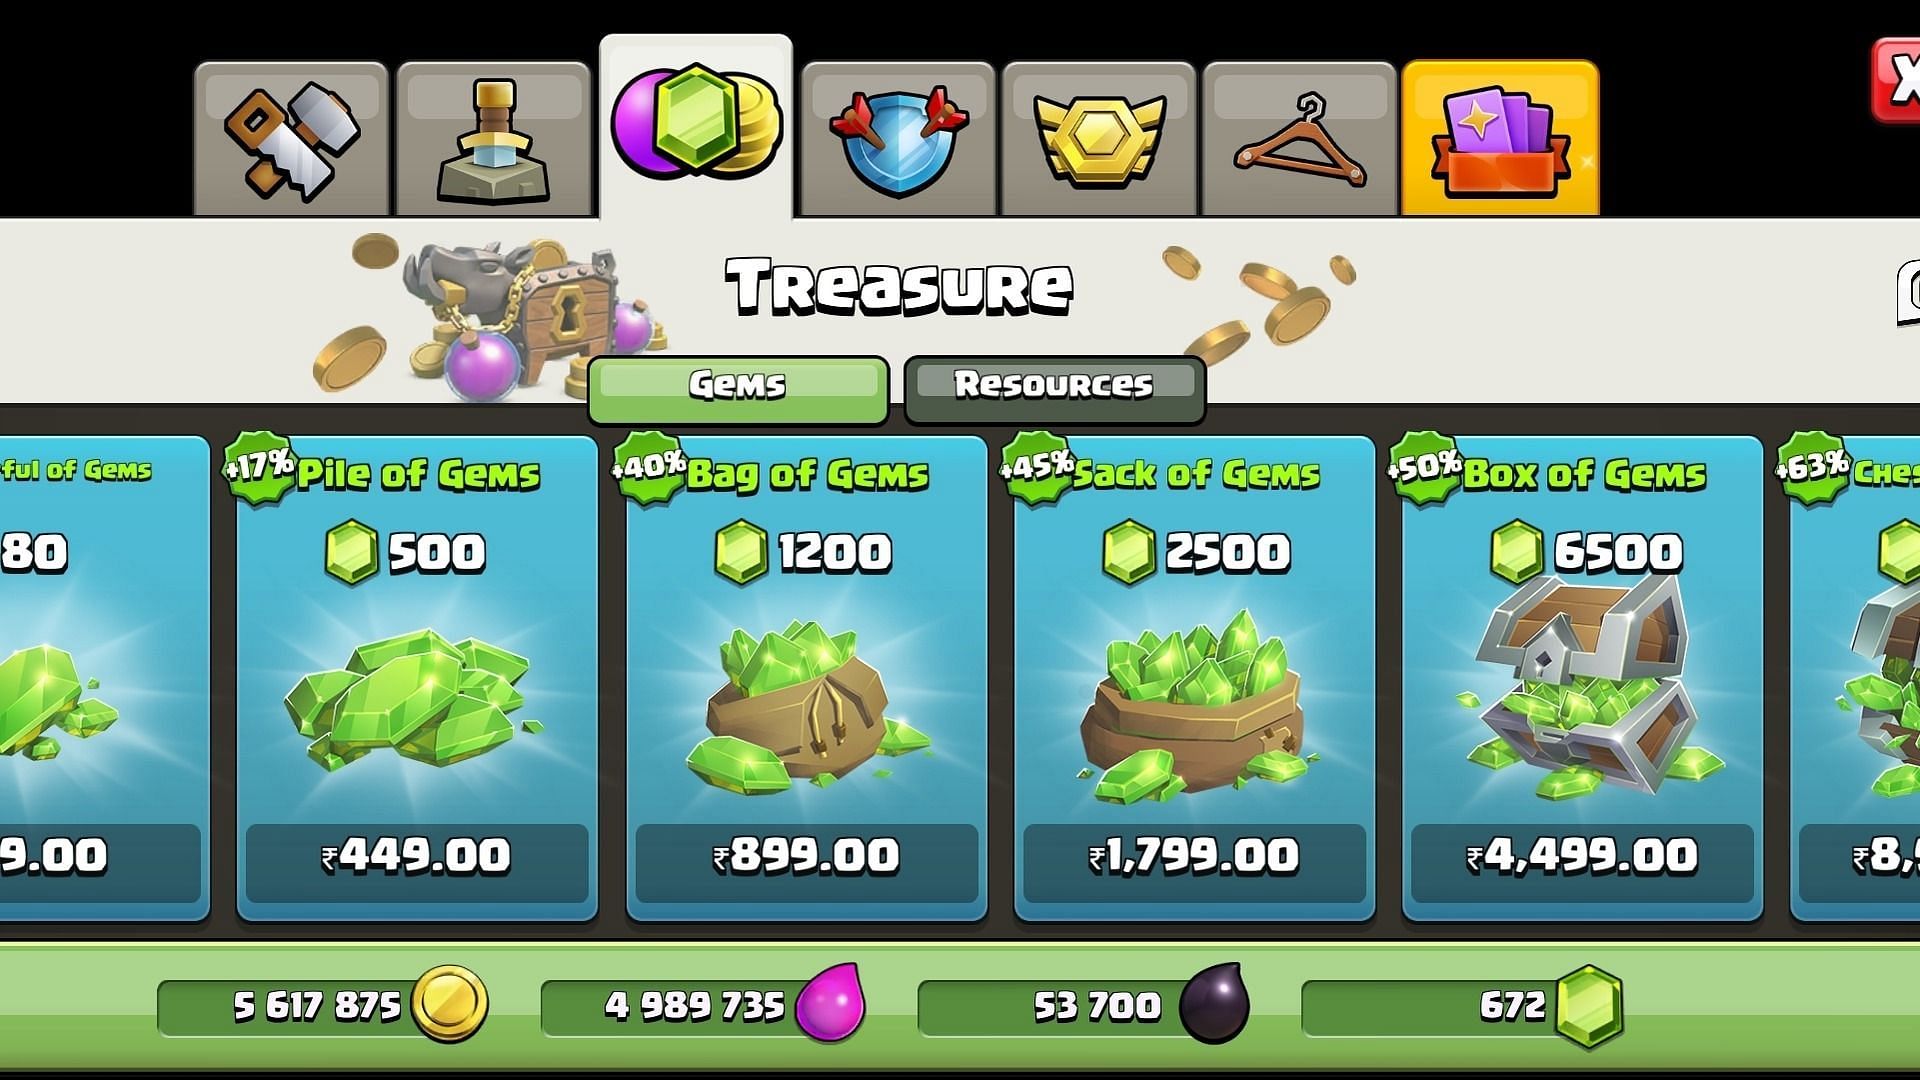 Grab 500 Clash of Clans Gems for free (Image via Supercell)